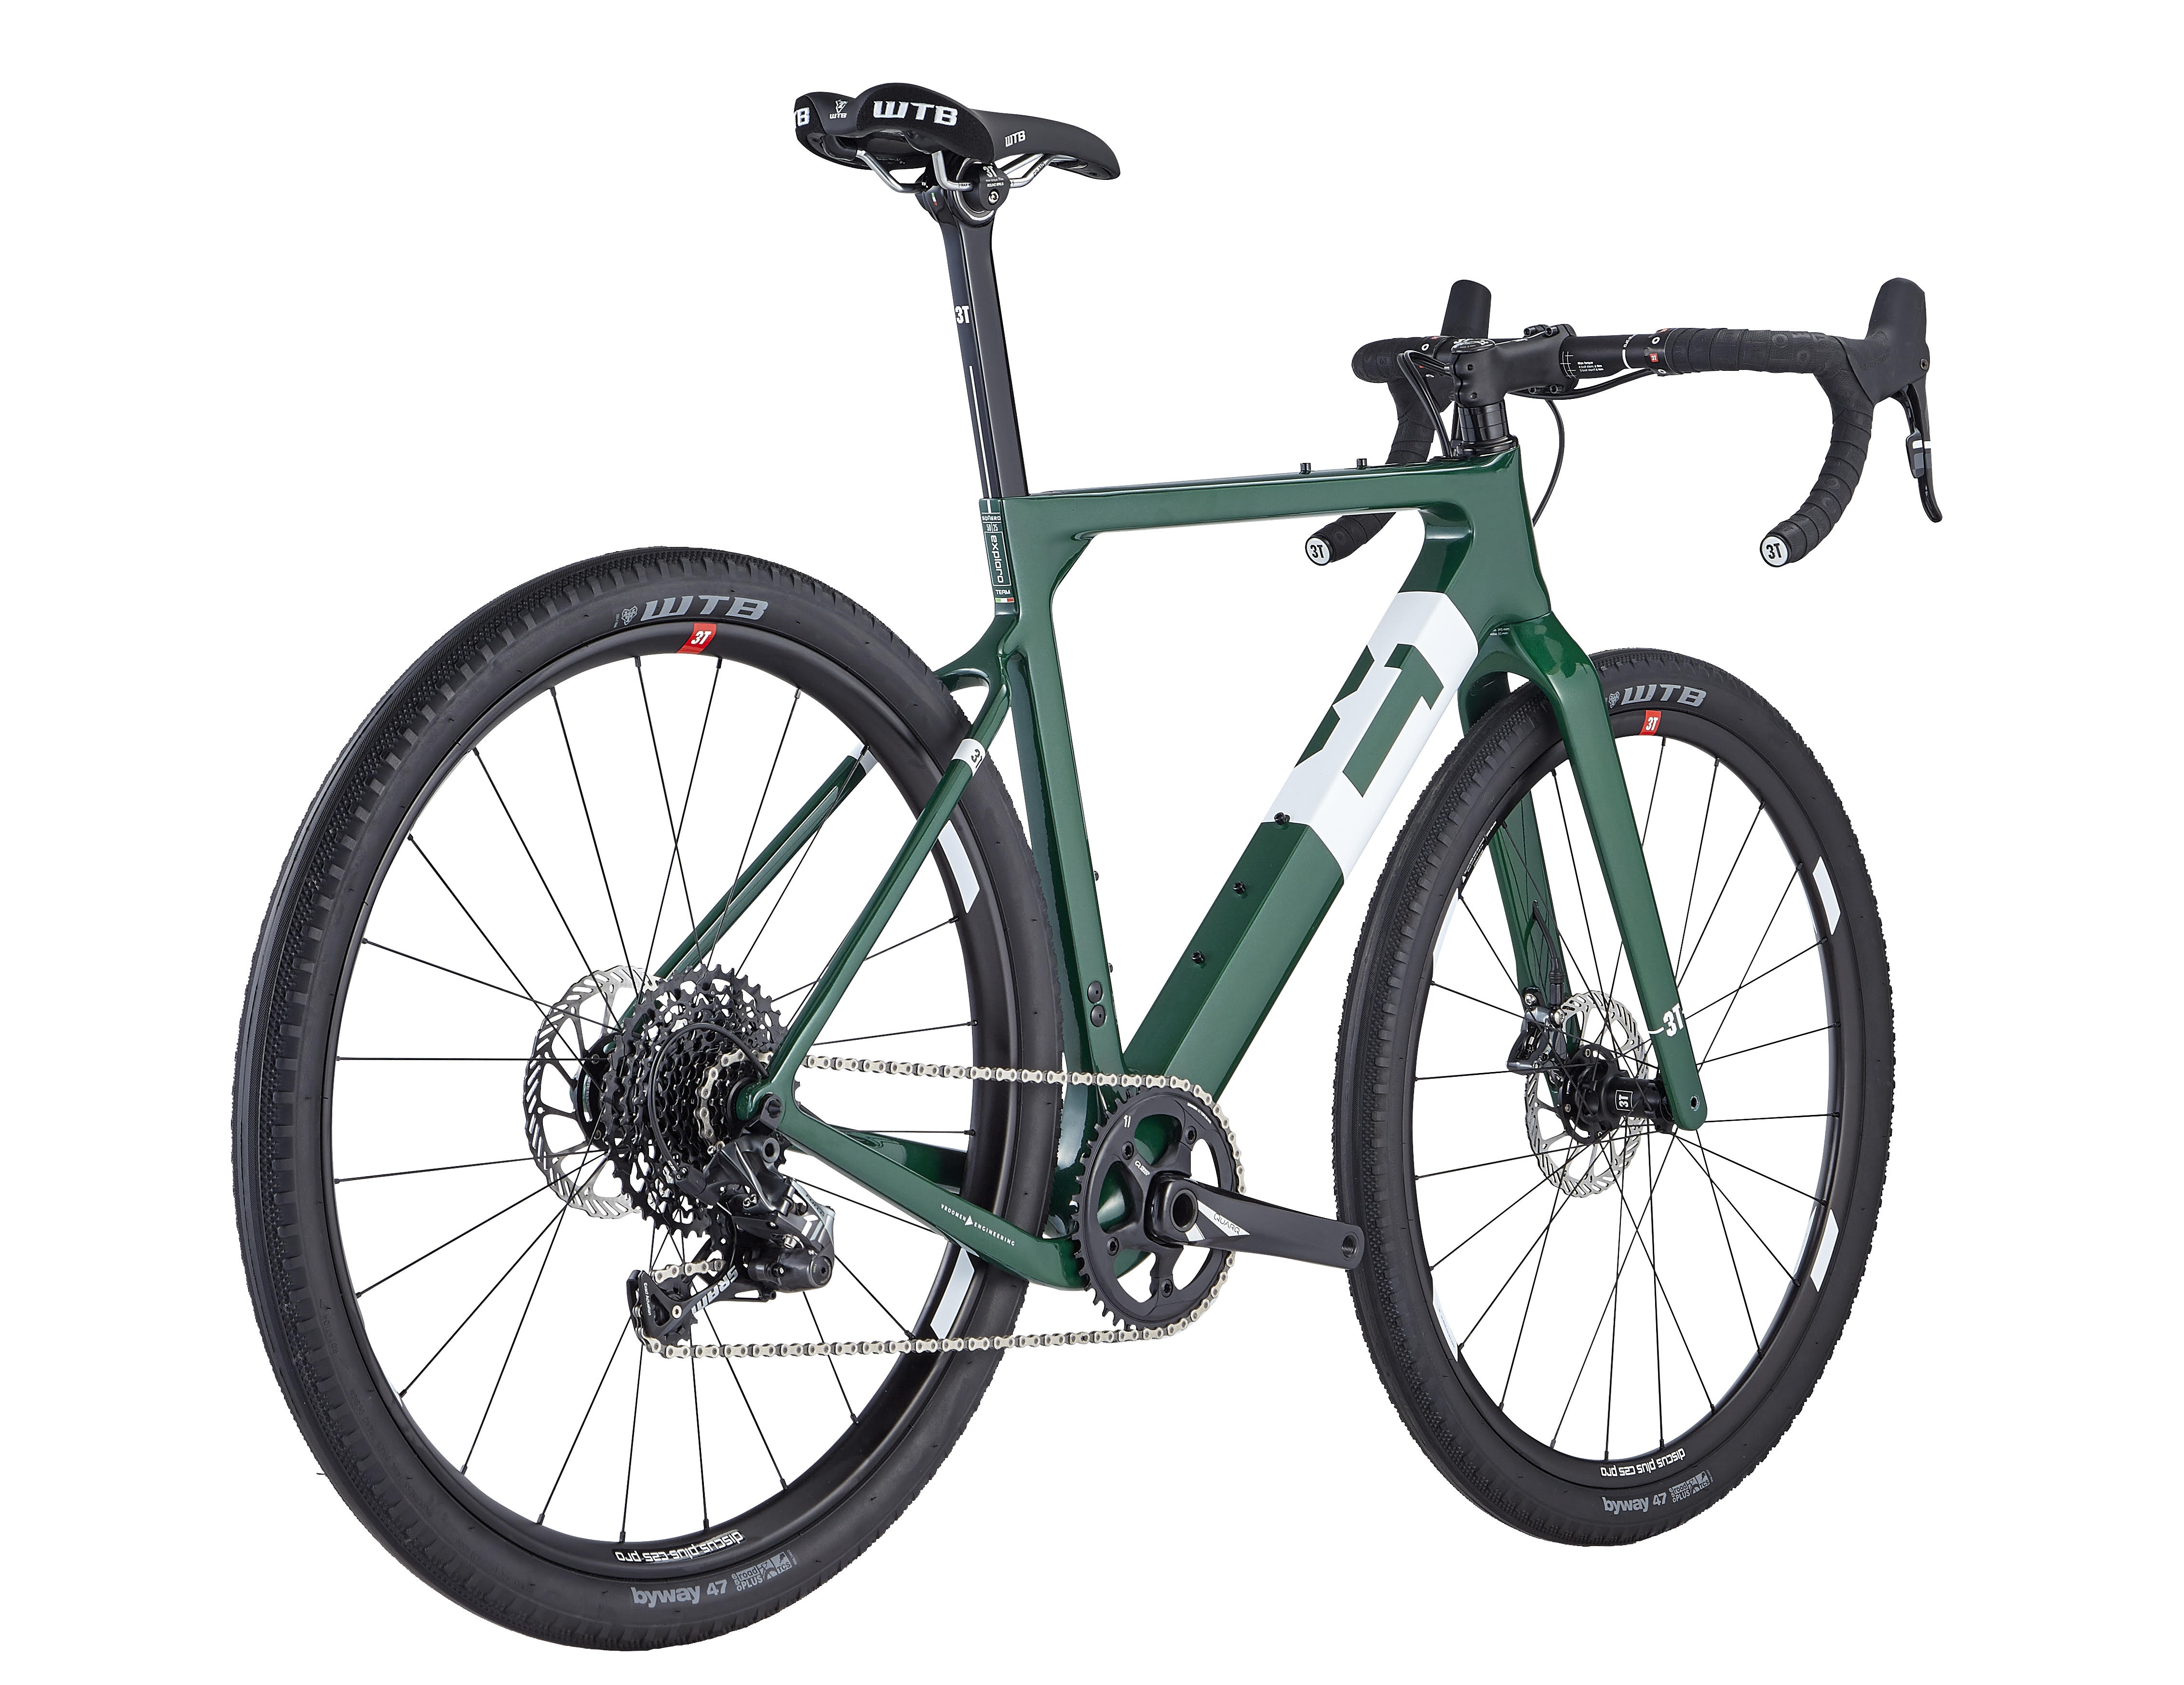 3T Exploro aero gravel bike looks even faster in Limited Edition Team Force Green